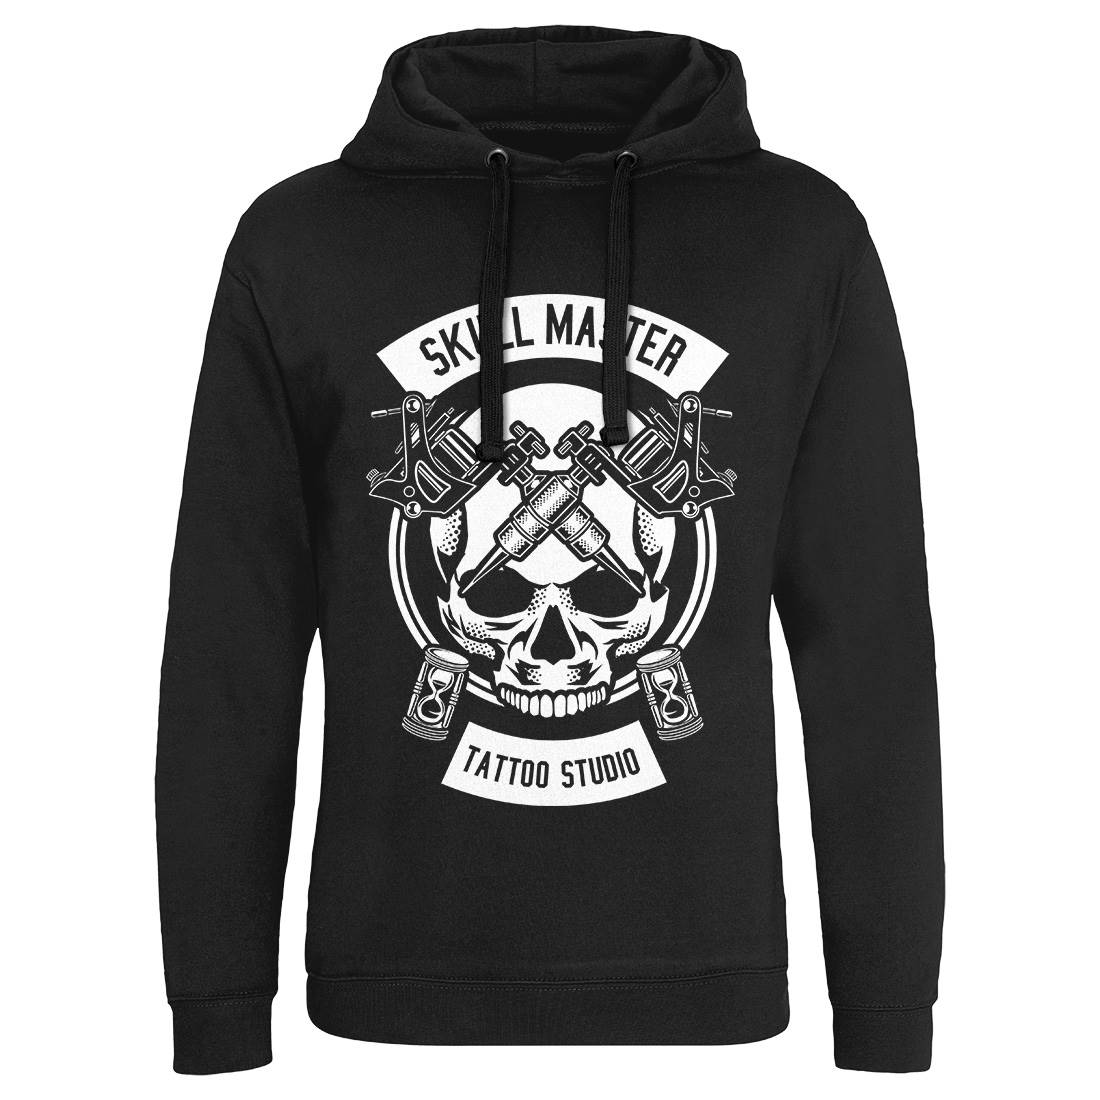 Skull Master Mens Hoodie Without Pocket Tattoo B630